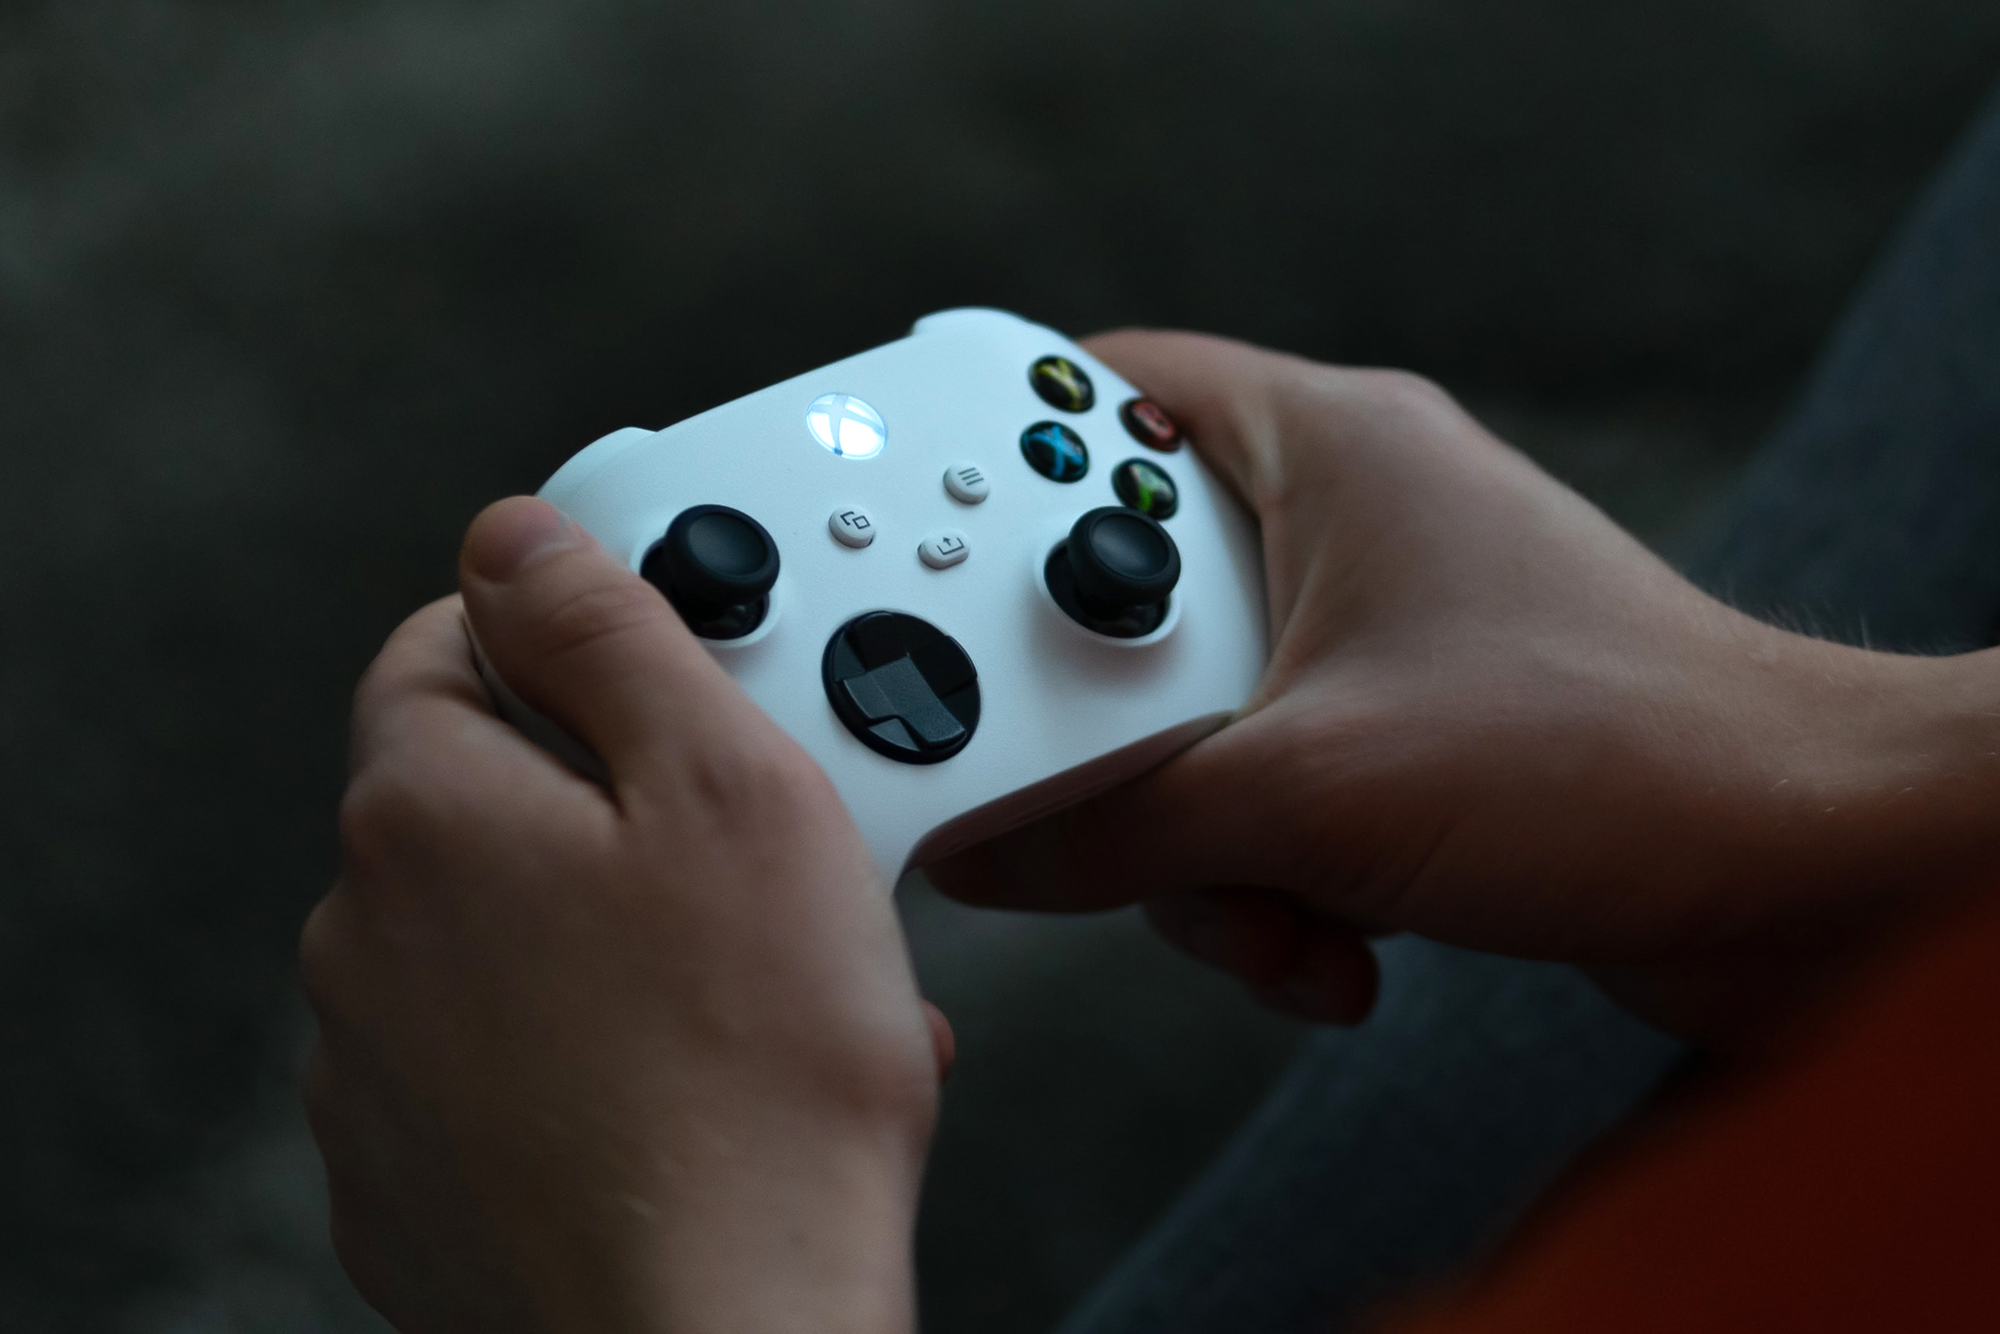 Microsoft and Paypal's four payments options could be especially useful for Xbox users.